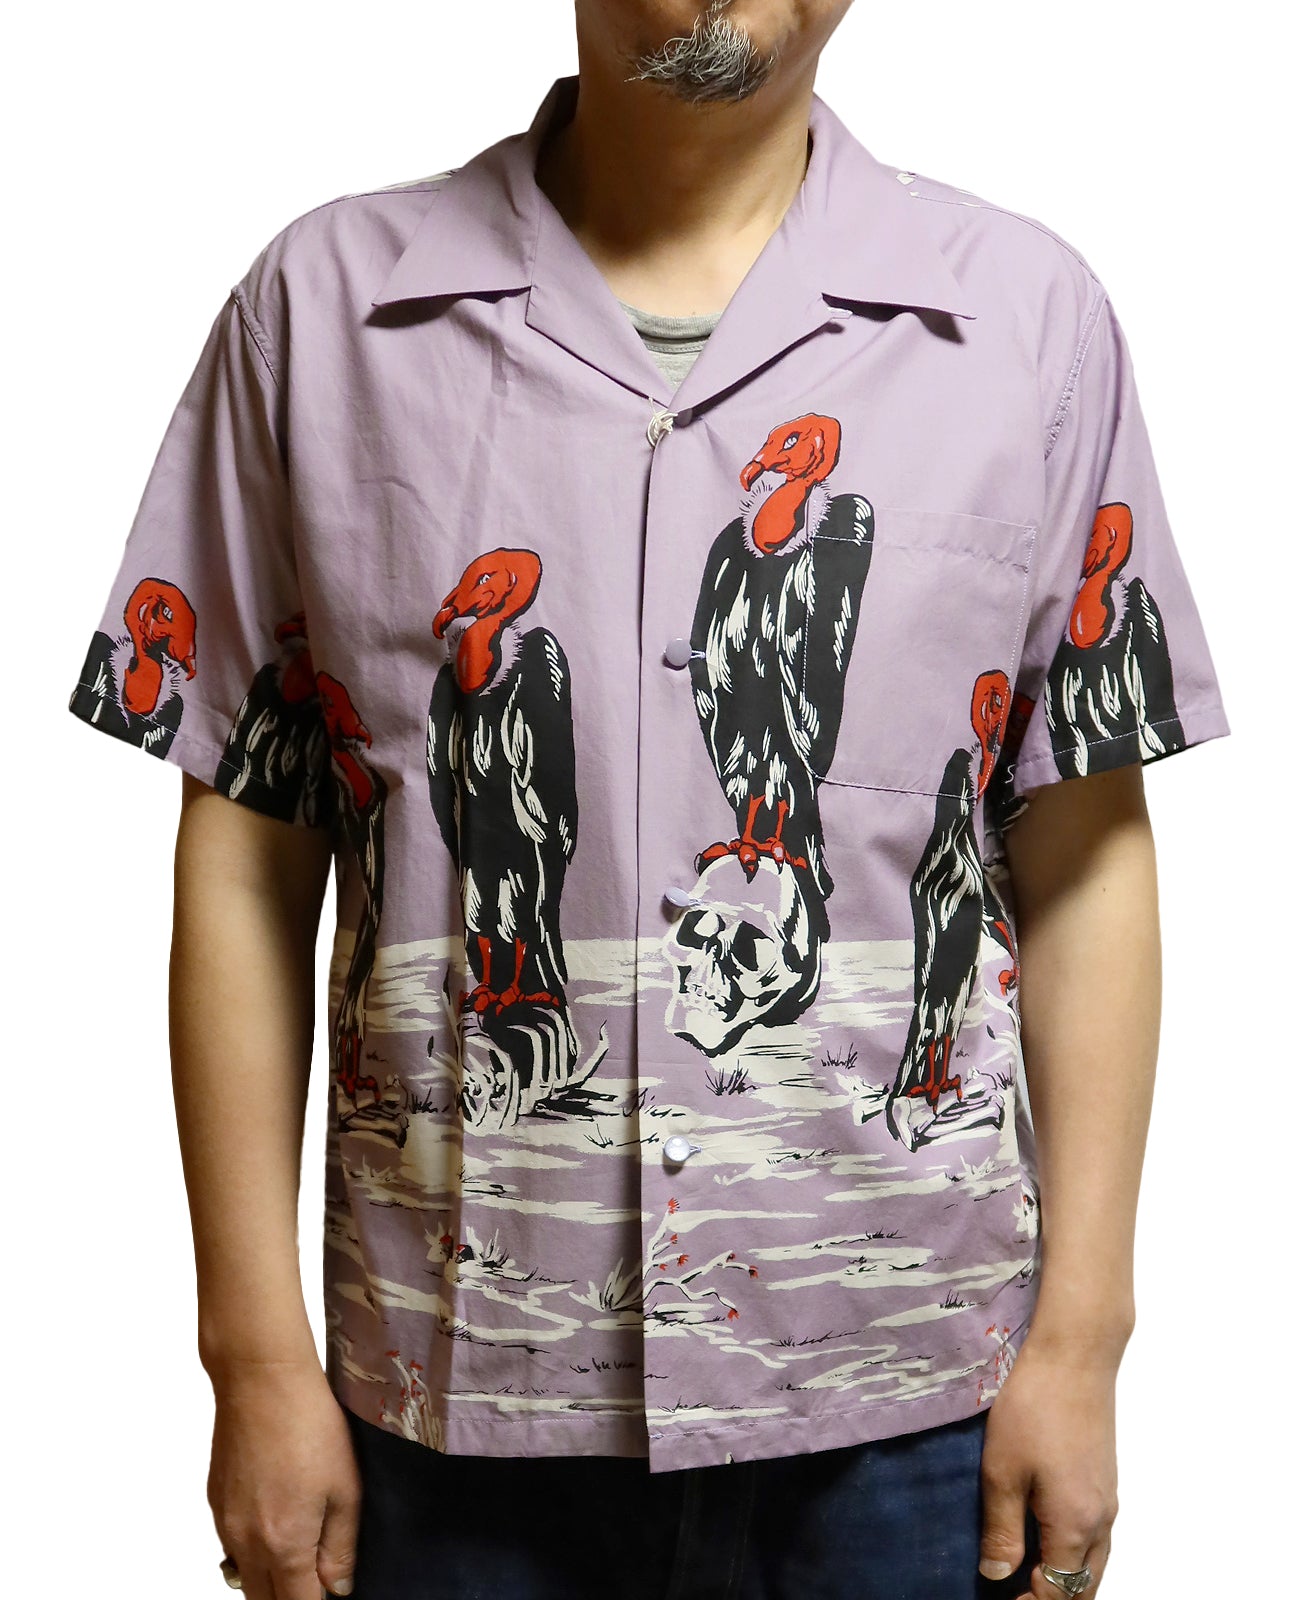 STAR OF HOLLYWOOD Cotton Typewriter Open Shirt Condor Short Sleeve SH39311 Made in Japan Purple